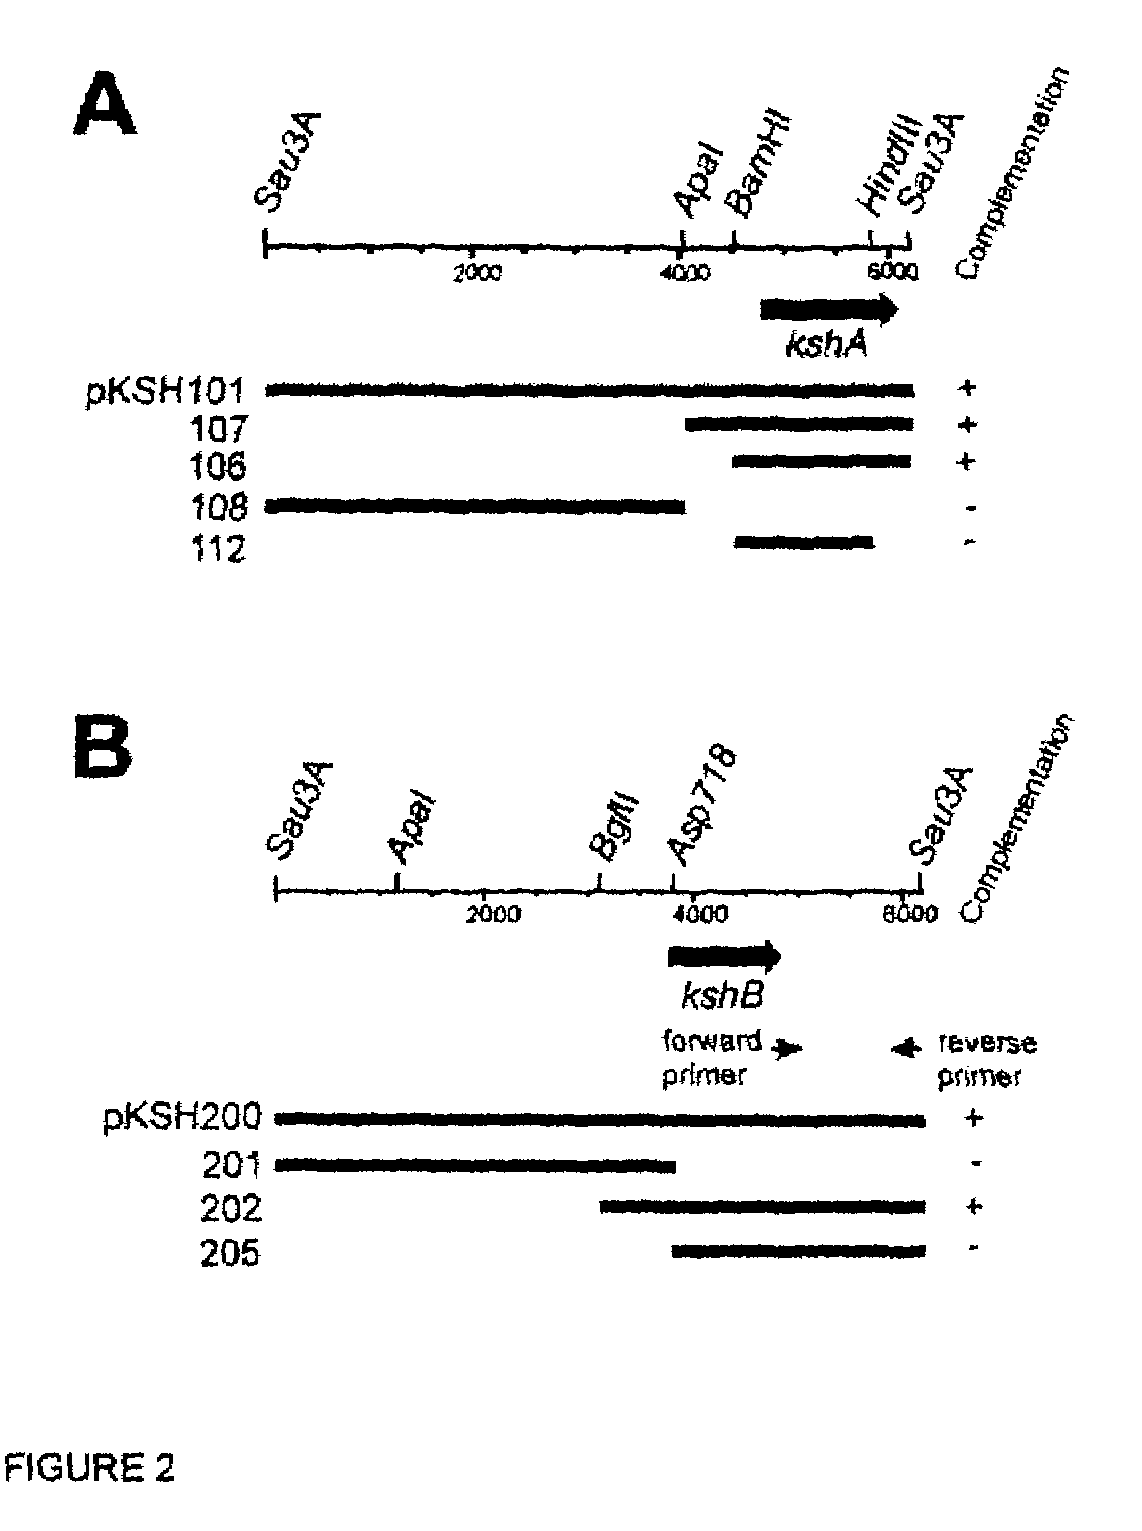 Indentification of 3-ketosteroid 9-alfa-hydroxylase genes and microorganisms blocked in 3-ketosteroid 9-alfa-hydroxylase activity